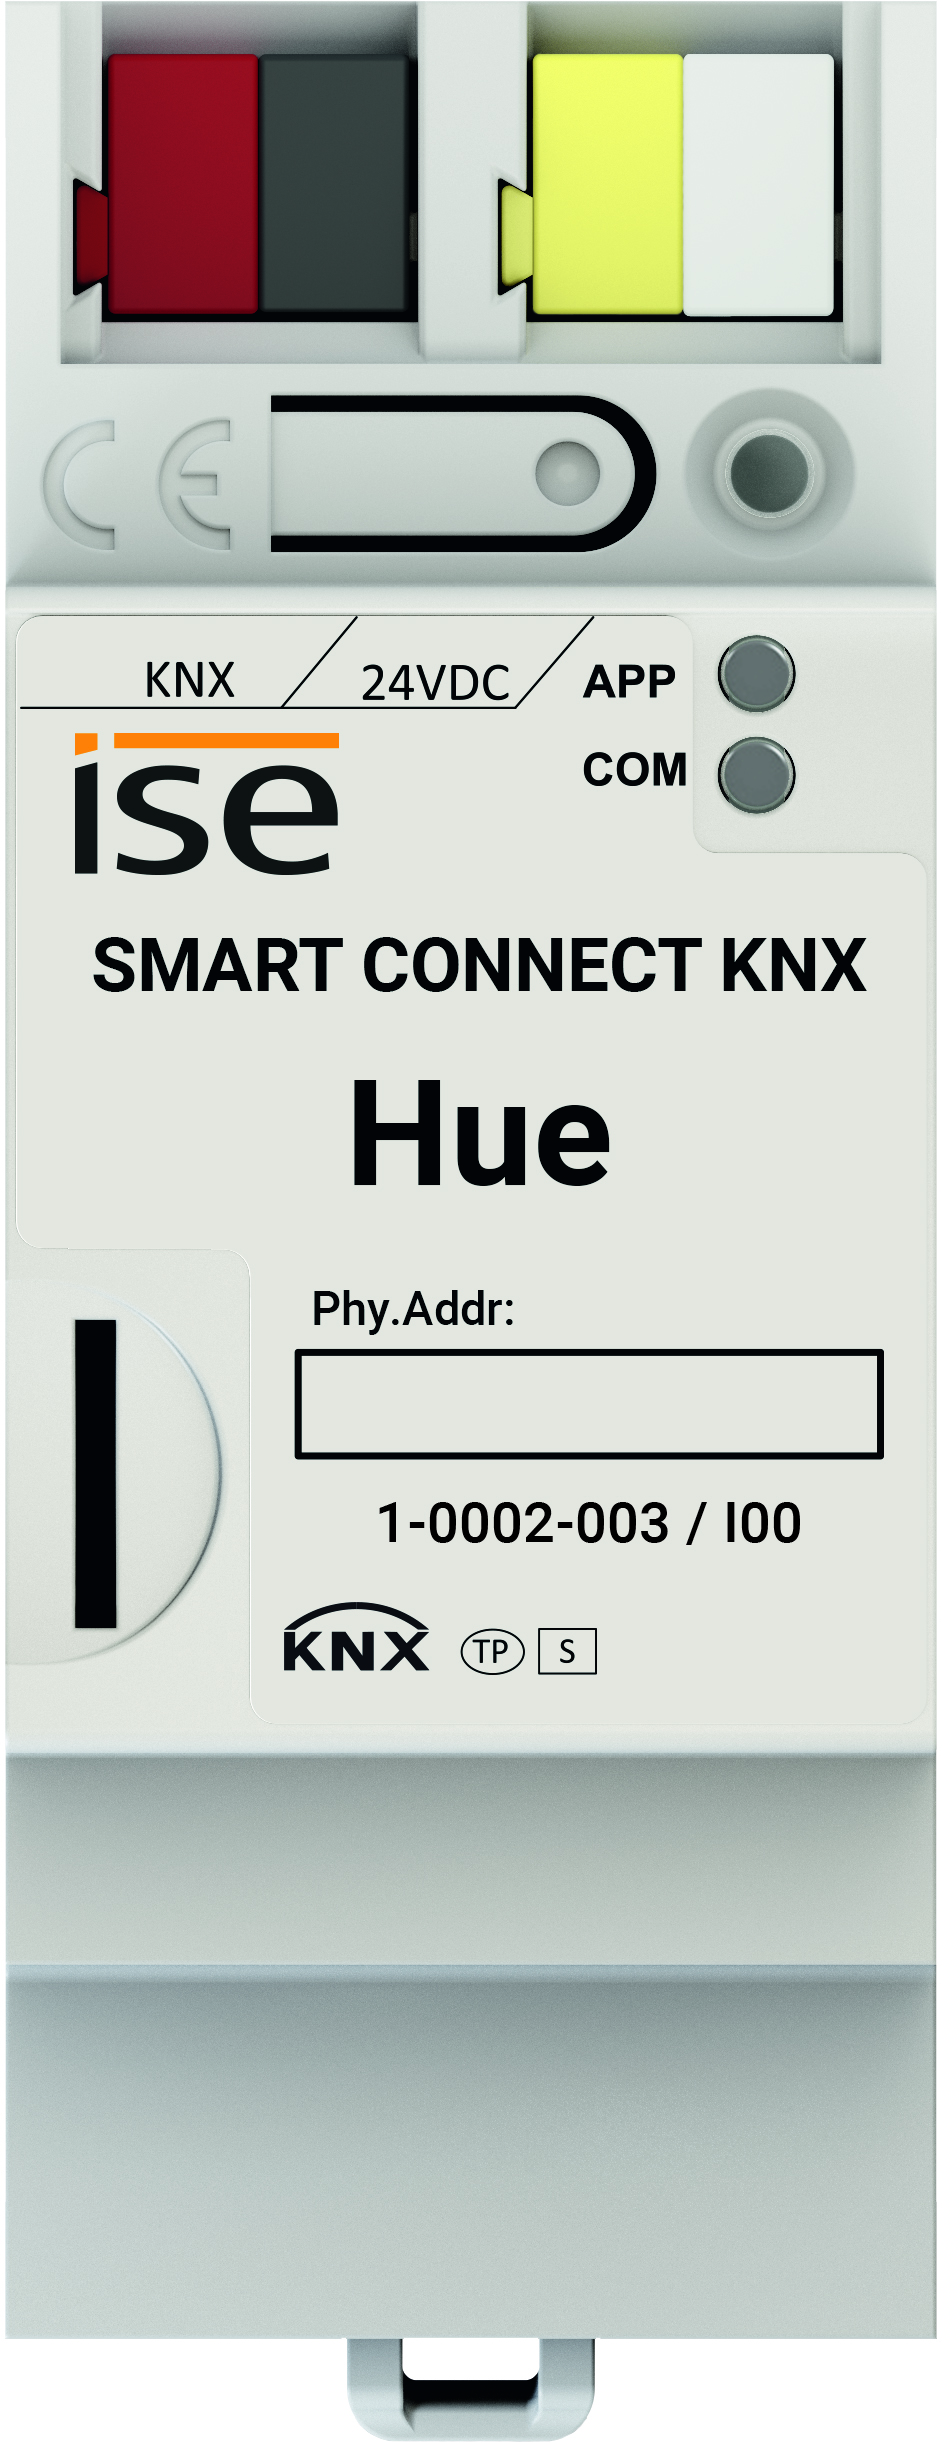 KNX-SMART CONNECT Hue